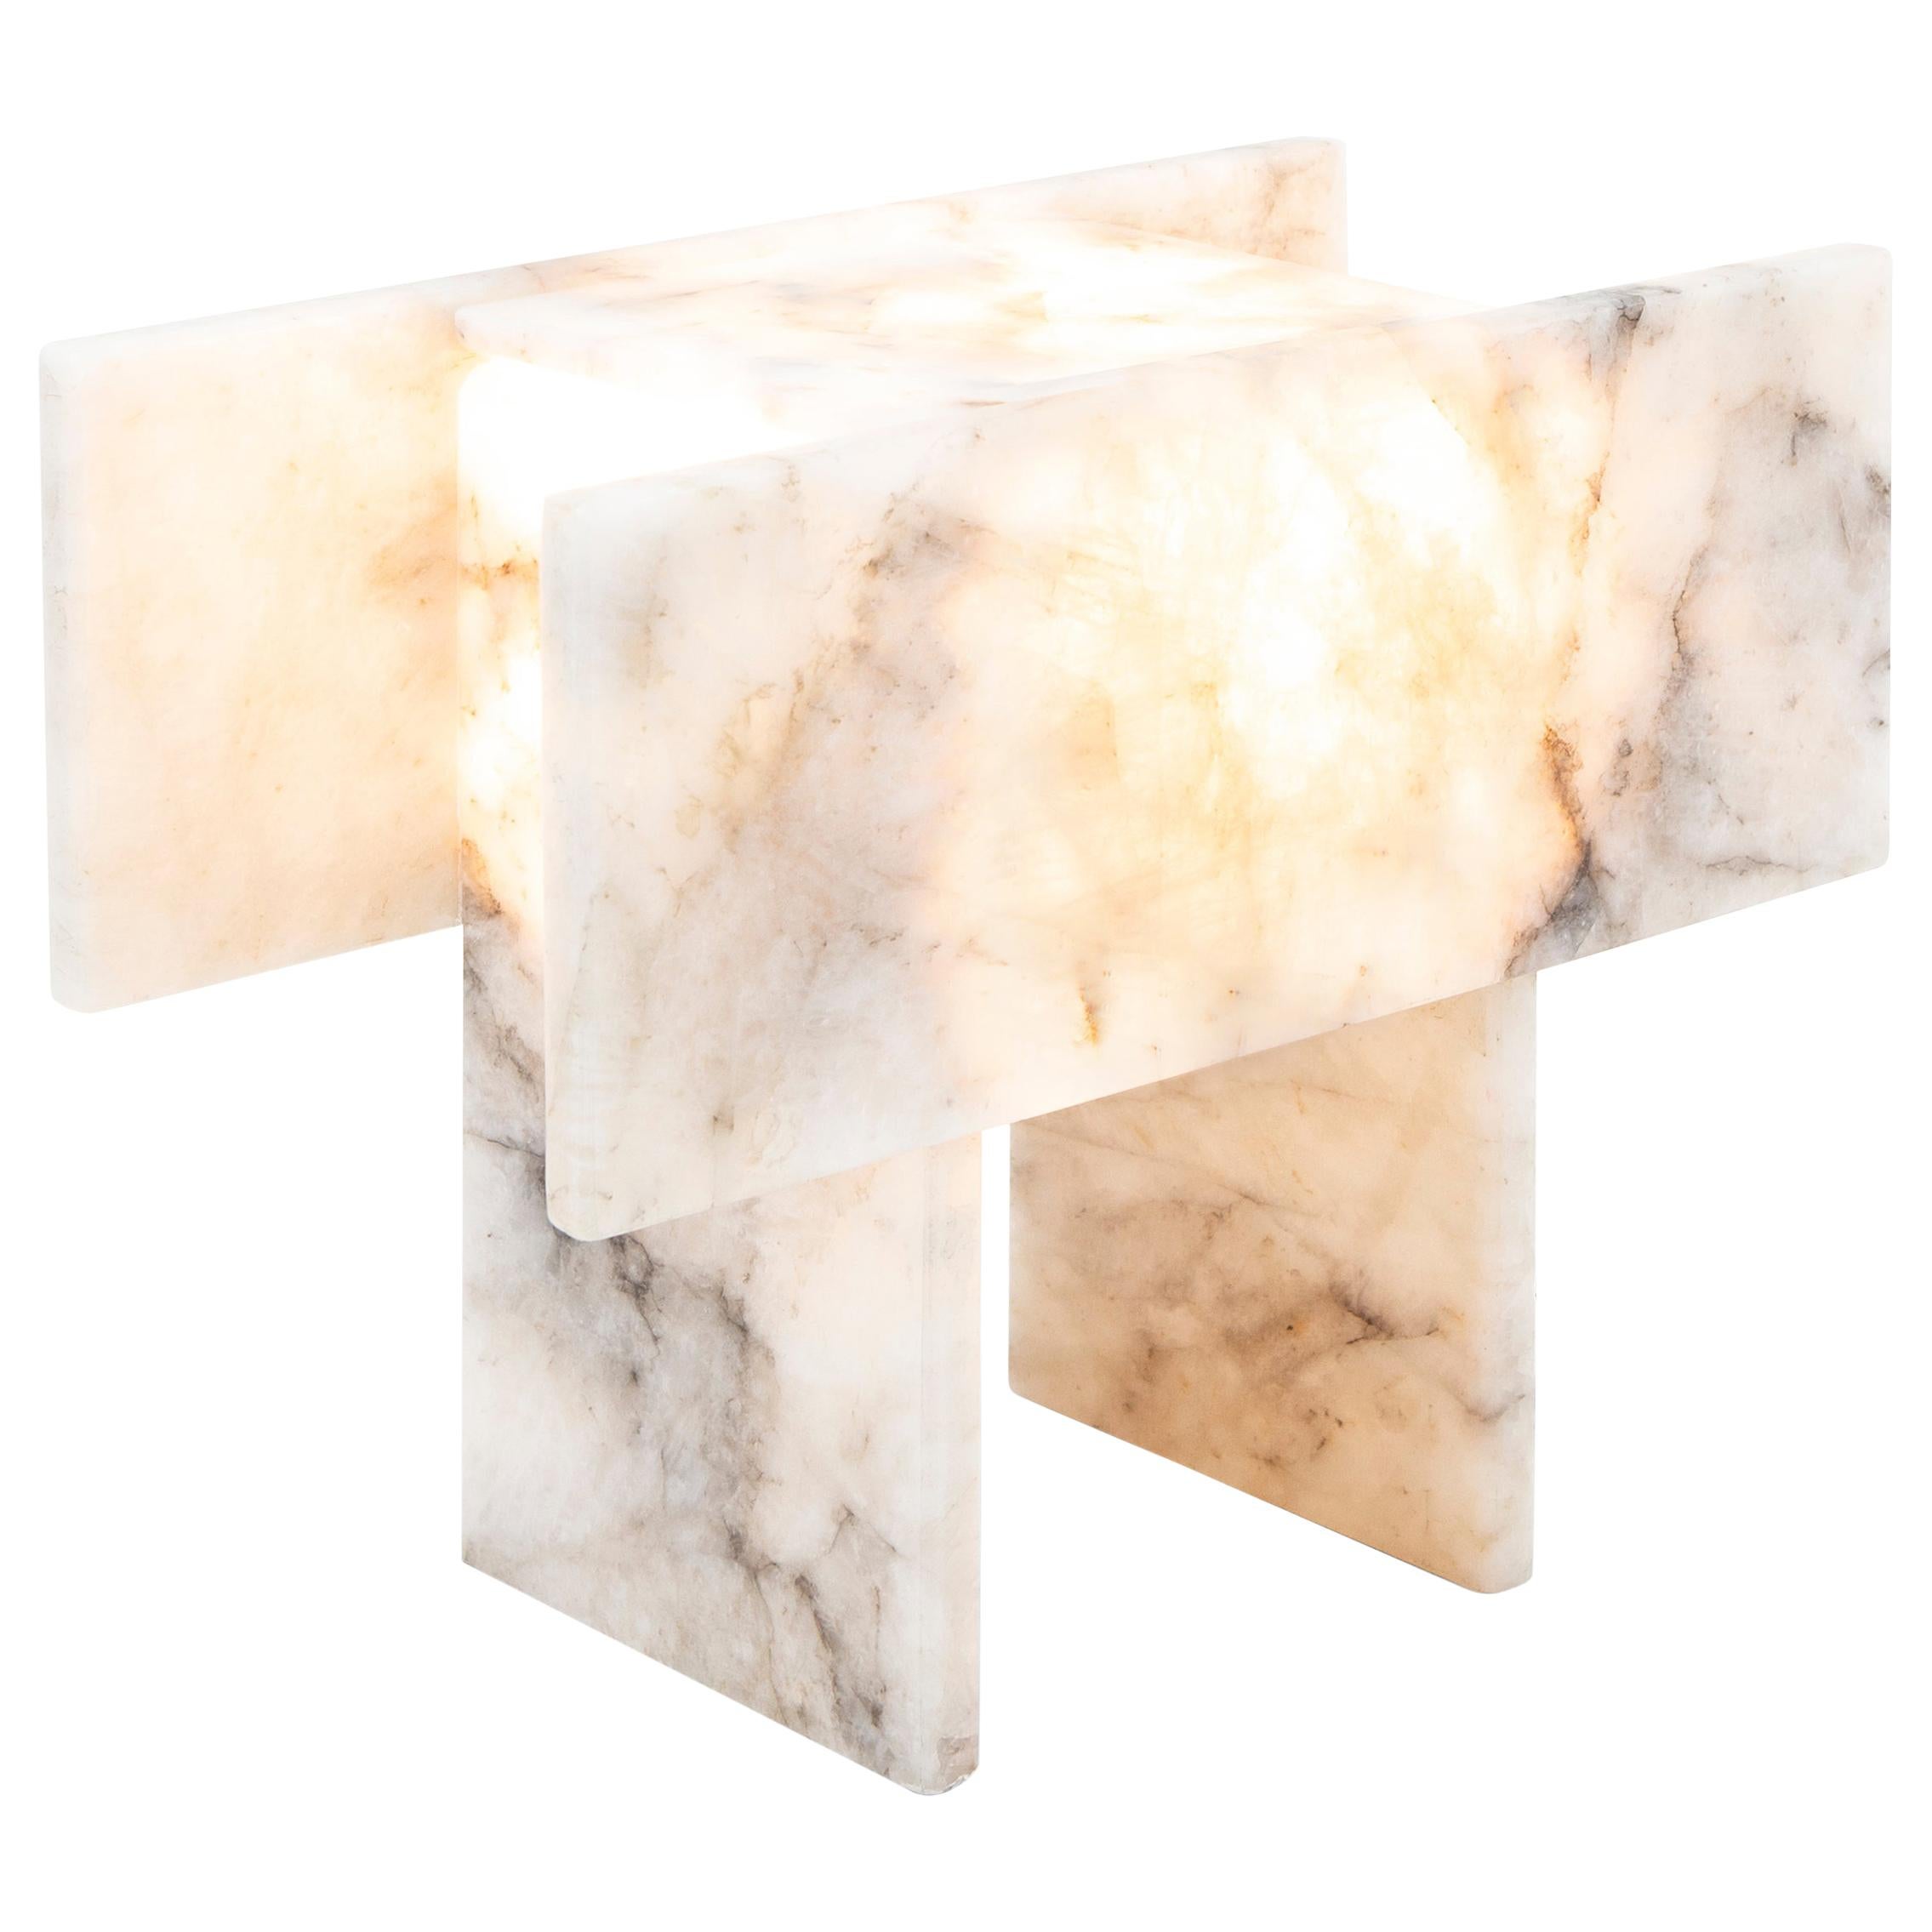 This is Pedrita table lamp (Model S) and it is part of Pedrita lamp series.
Pedrita lamp series’ concept is based on an experimentation of Brazilian stones: quartzites and quartz crystals, which are natural, semiprecious and exotic stones found in